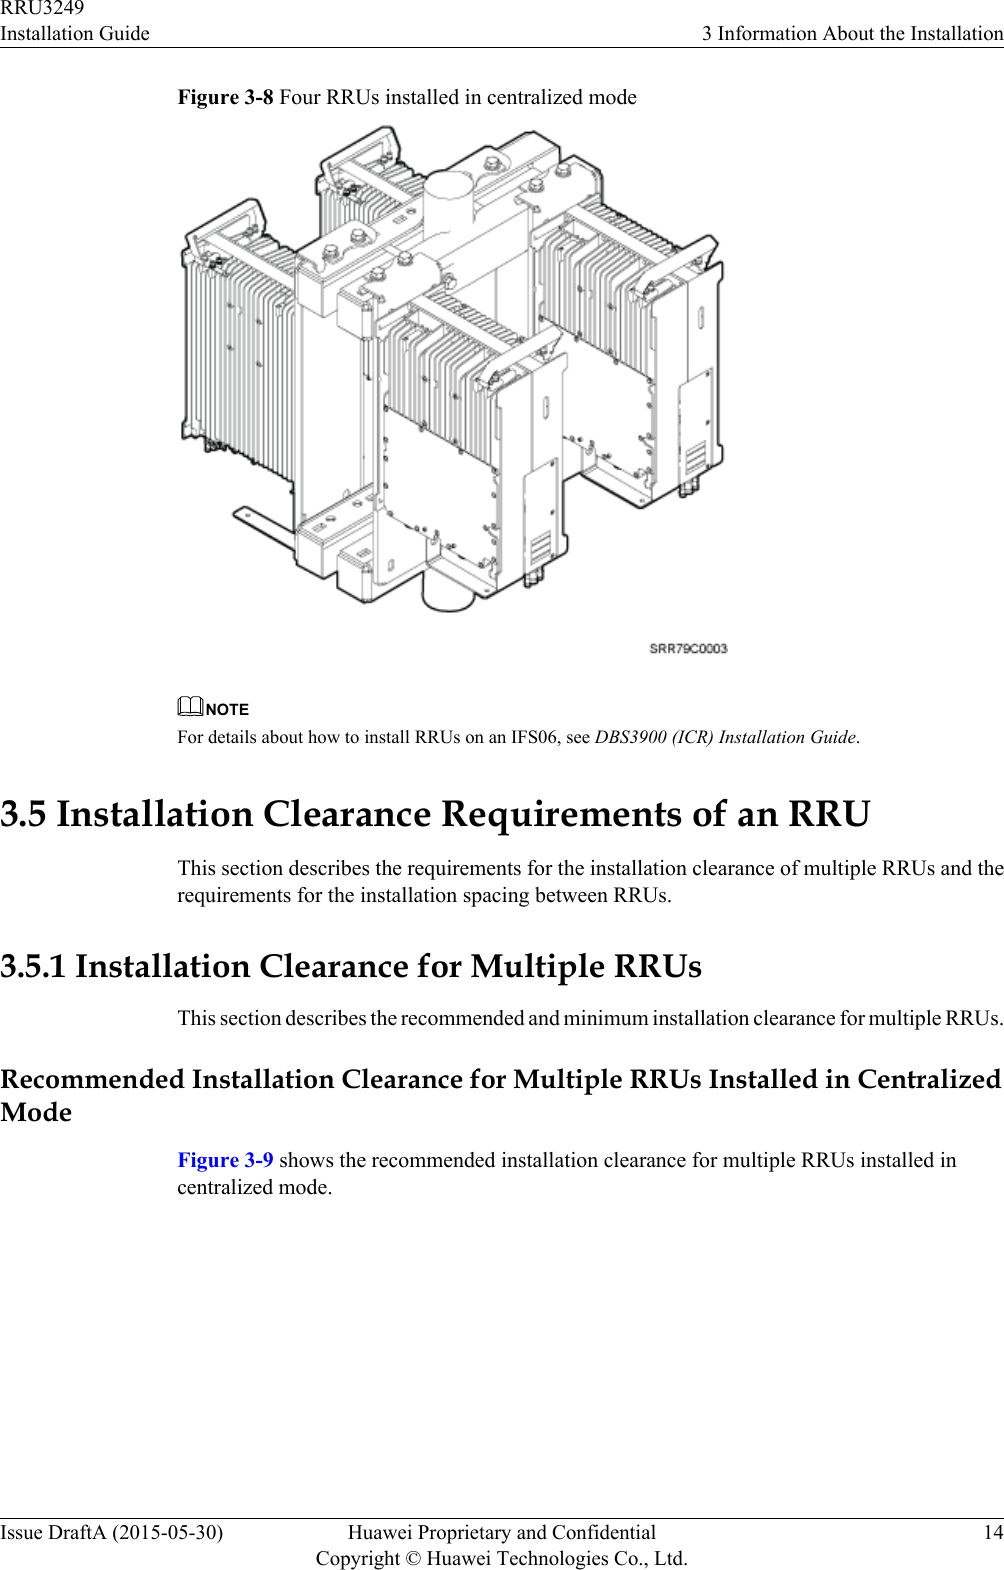 Figure 3-8 Four RRUs installed in centralized modeNOTEFor details about how to install RRUs on an IFS06, see DBS3900 (ICR) Installation Guide.3.5 Installation Clearance Requirements of an RRUThis section describes the requirements for the installation clearance of multiple RRUs and therequirements for the installation spacing between RRUs.3.5.1 Installation Clearance for Multiple RRUsThis section describes the recommended and minimum installation clearance for multiple RRUs.Recommended Installation Clearance for Multiple RRUs Installed in CentralizedModeFigure 3-9 shows the recommended installation clearance for multiple RRUs installed incentralized mode.RRU3249Installation Guide 3 Information About the InstallationIssue DraftA (2015-05-30) Huawei Proprietary and ConfidentialCopyright © Huawei Technologies Co., Ltd.14